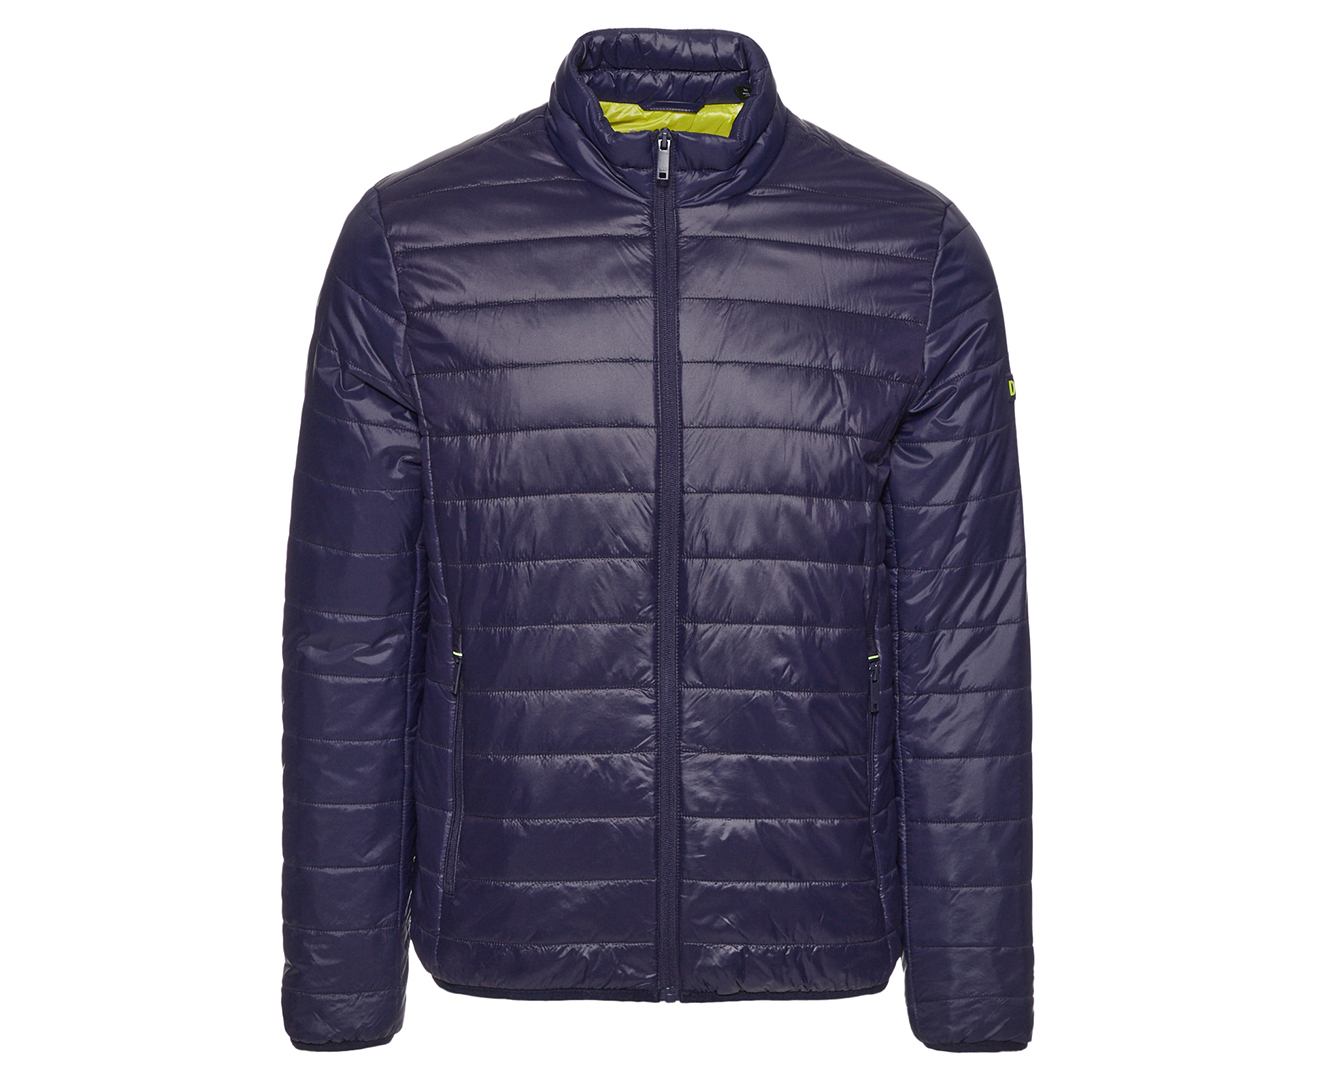 DKNY Men's Quilted Packable Jacket - Navy | Catch.co.nz